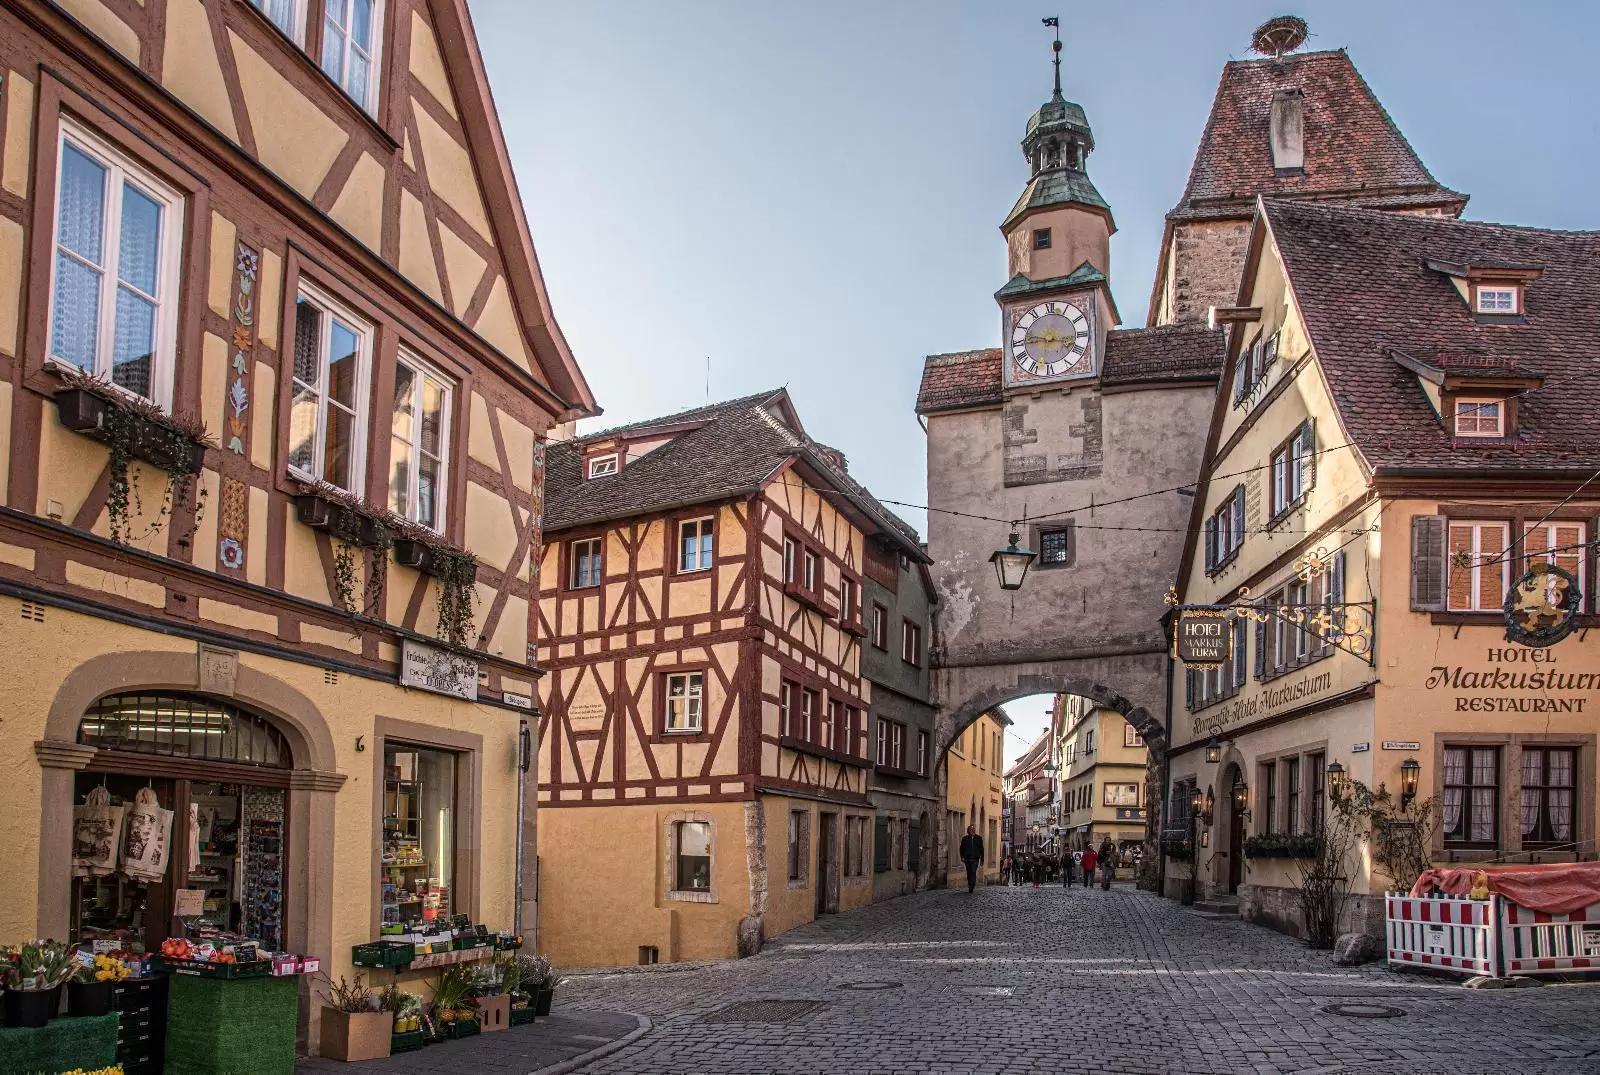 Rothenburg Röder alley and St. Mark’s Tower